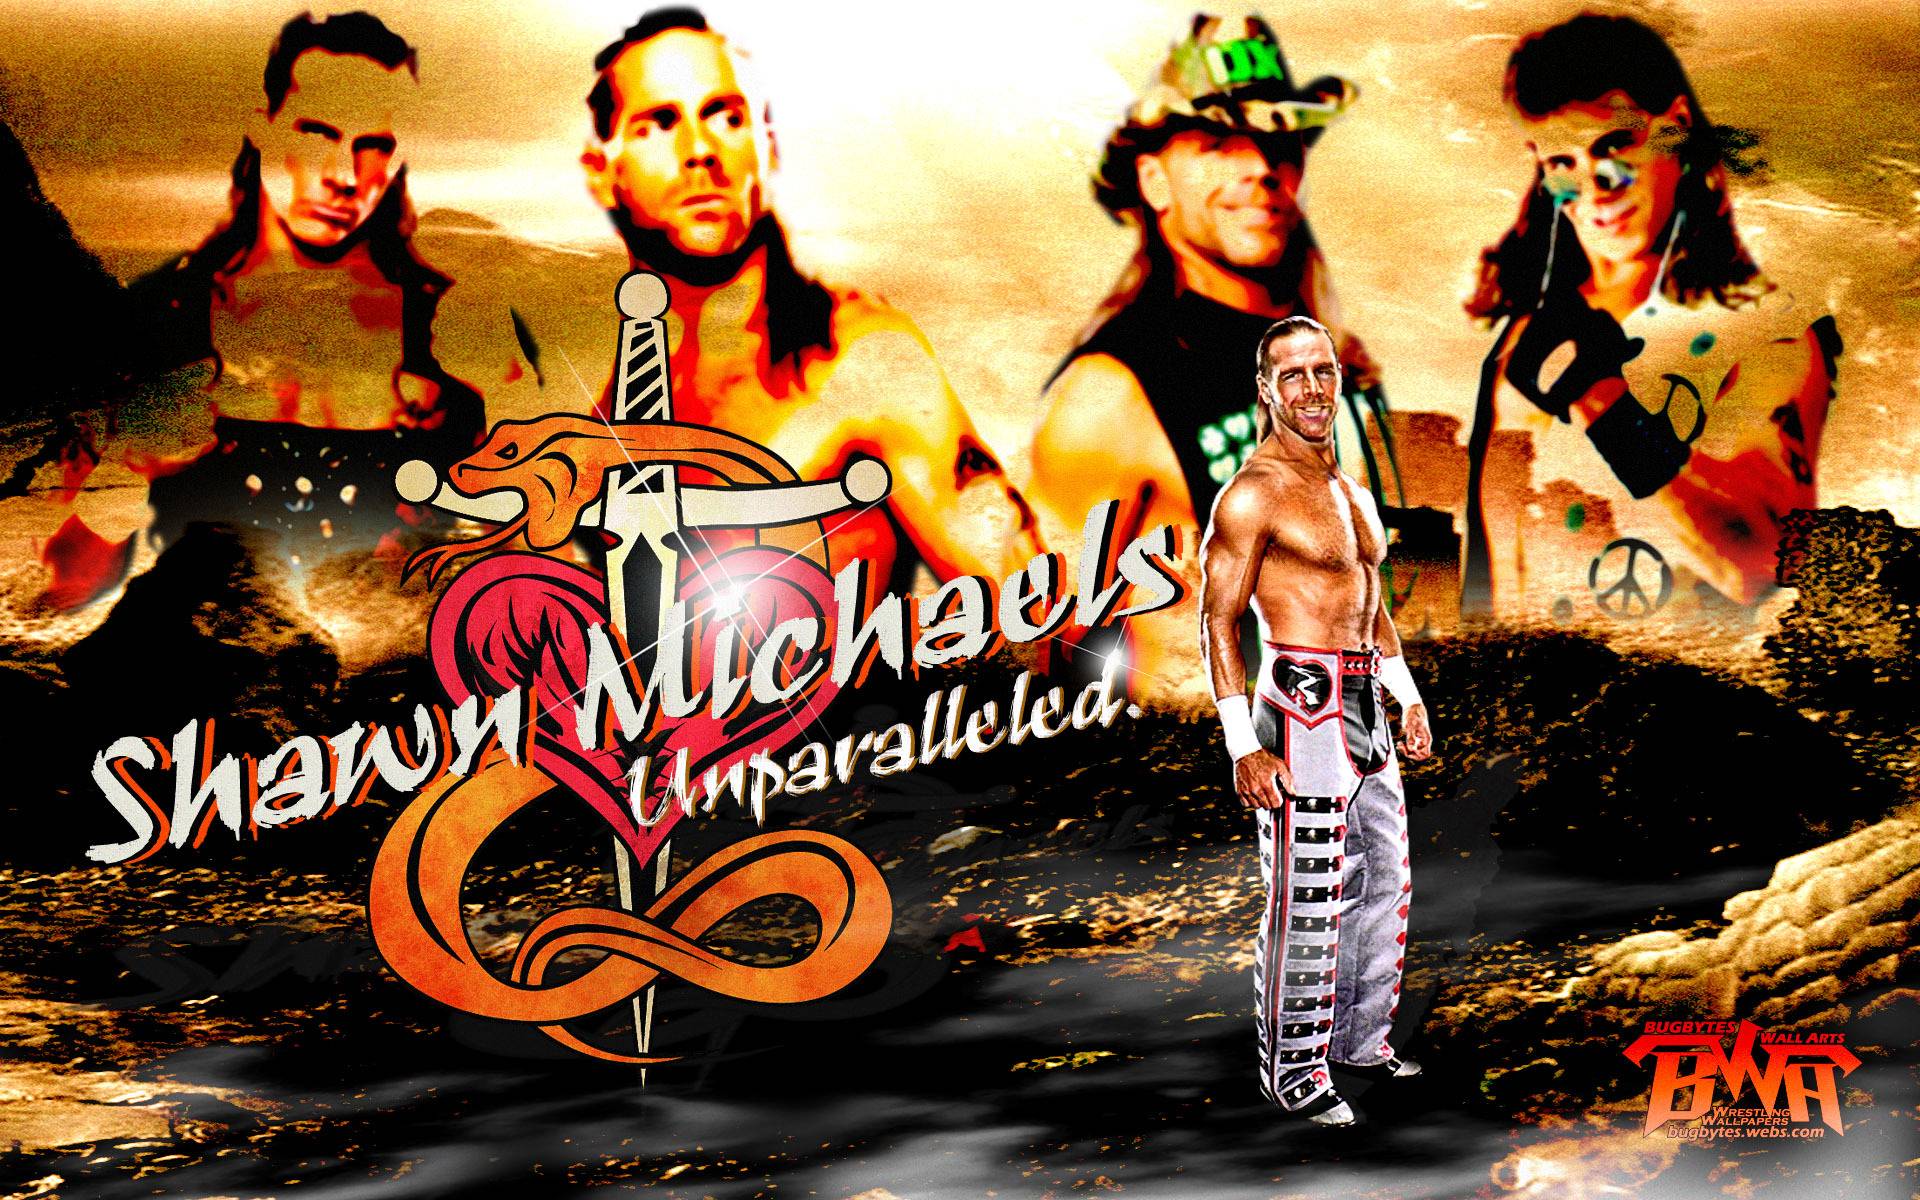 Hbk Picture 17764 HD Desktop Background and Widescreen